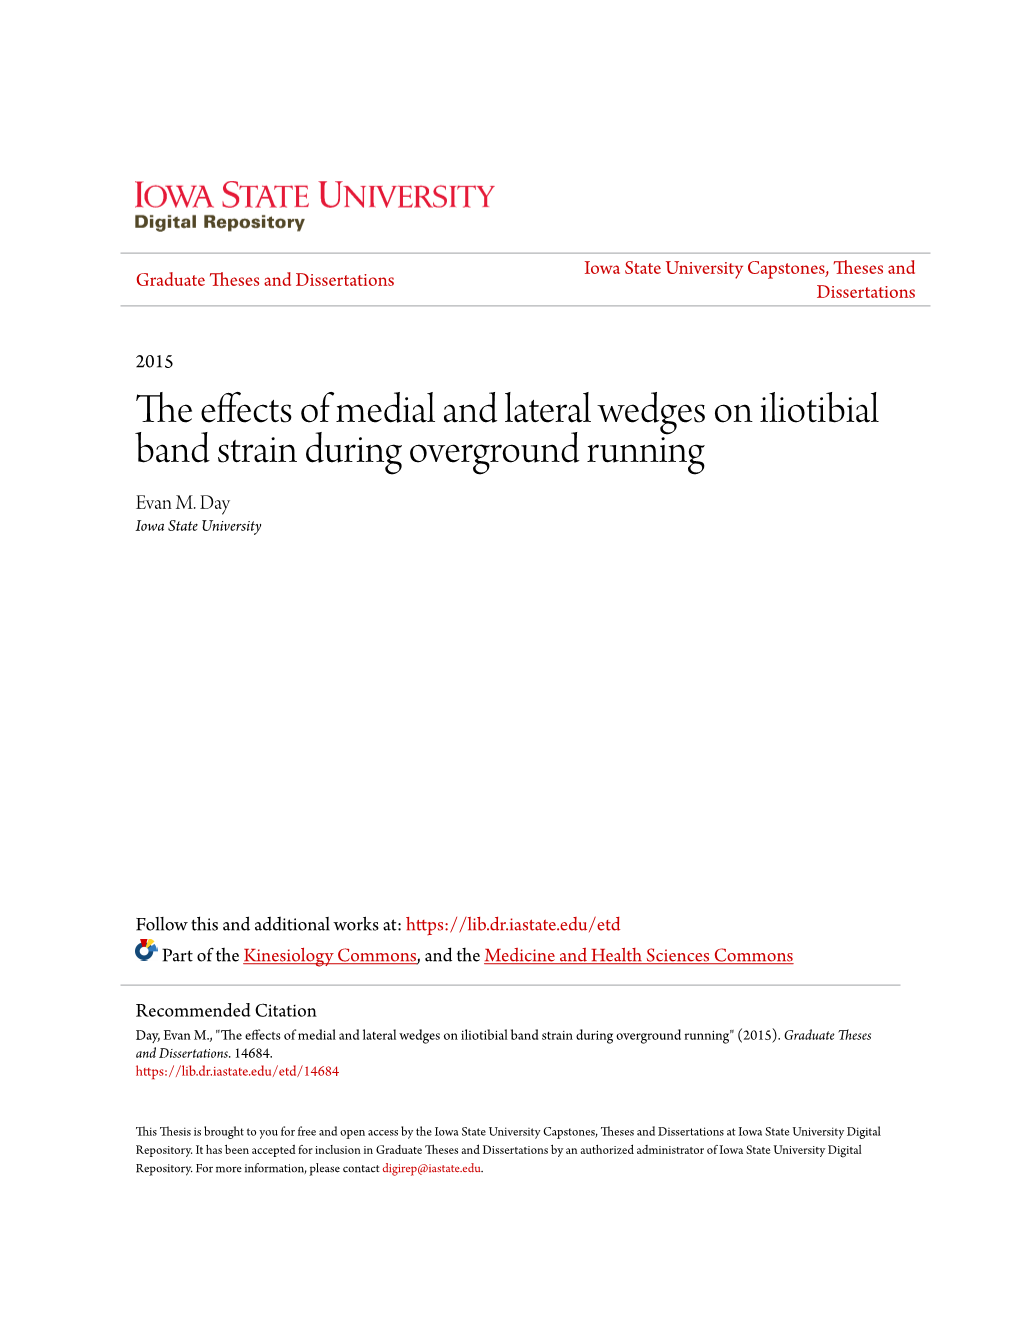 The Effects of Medial and Lateral Wedges on Iliotibial Band Strain During Overground Running Evan M